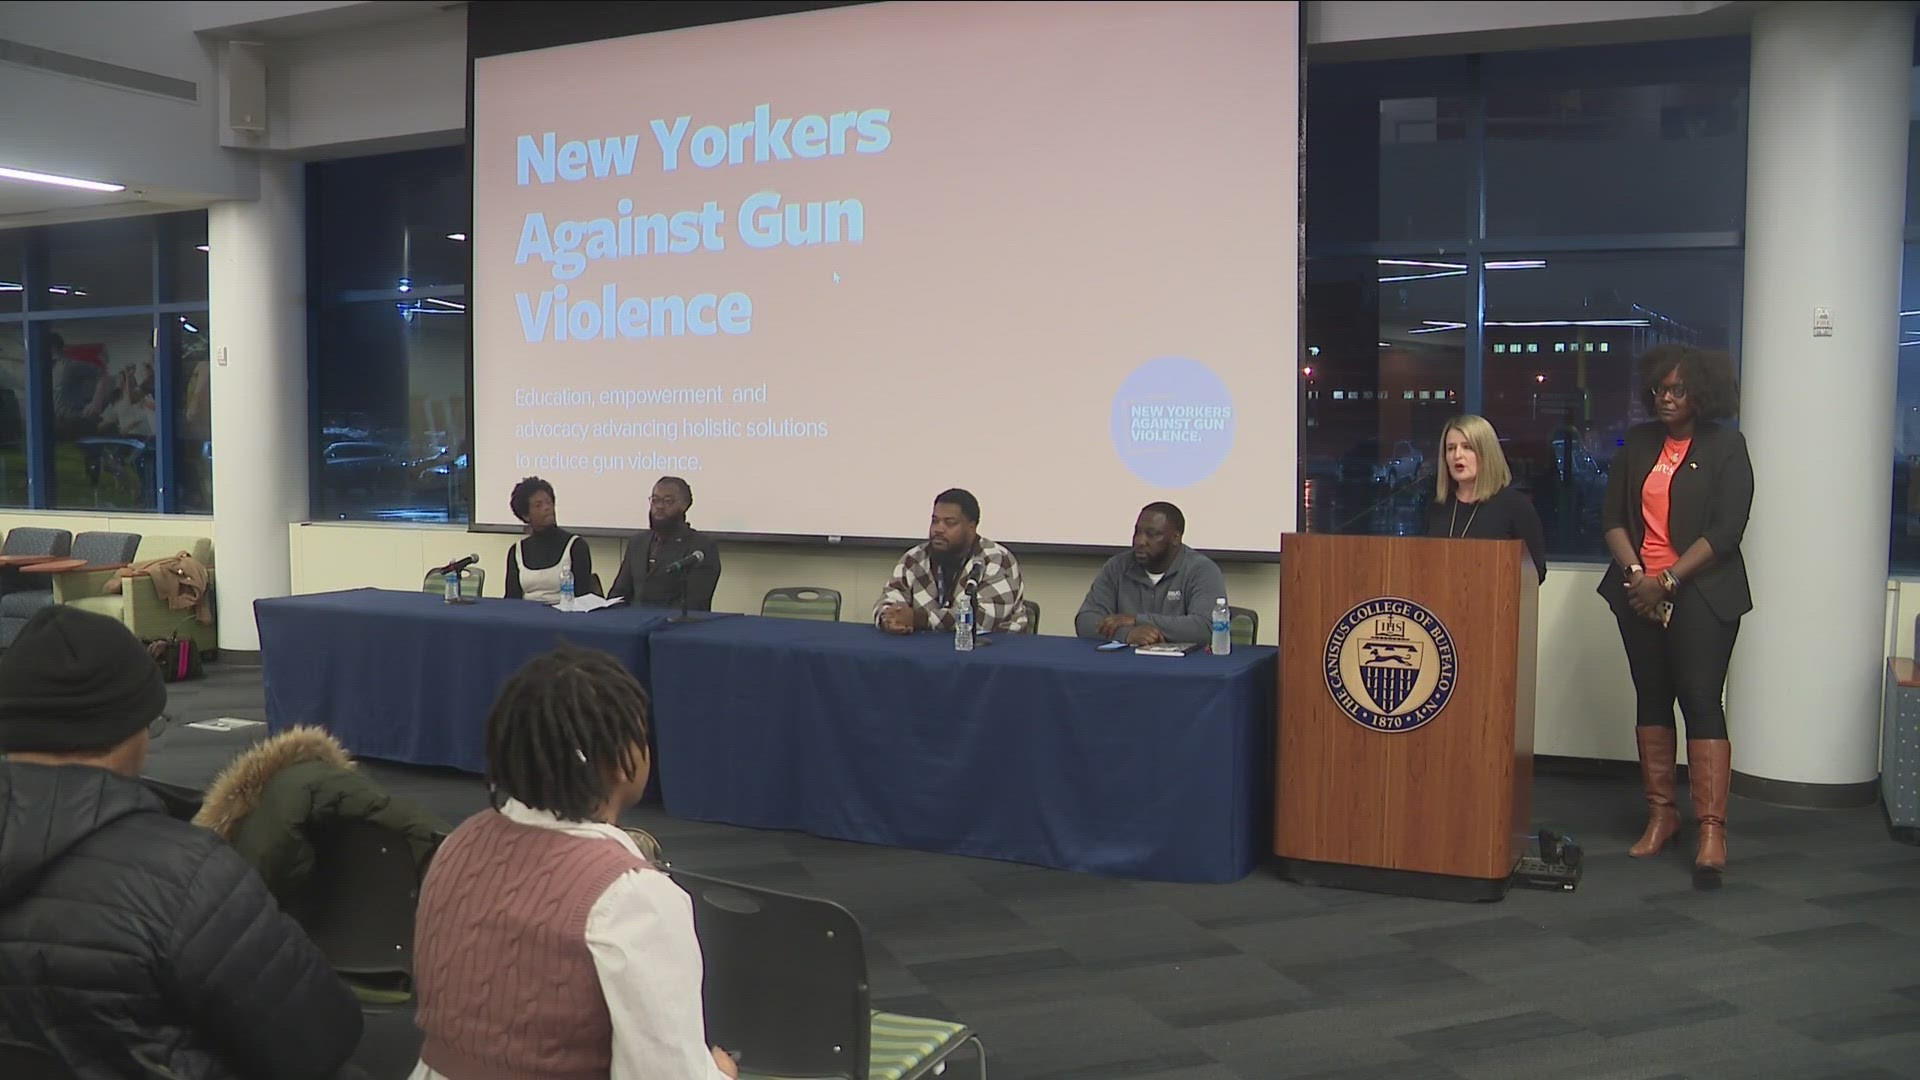 The discussion featured the Deputy Director of the White House Office of Gun Violence Prevention